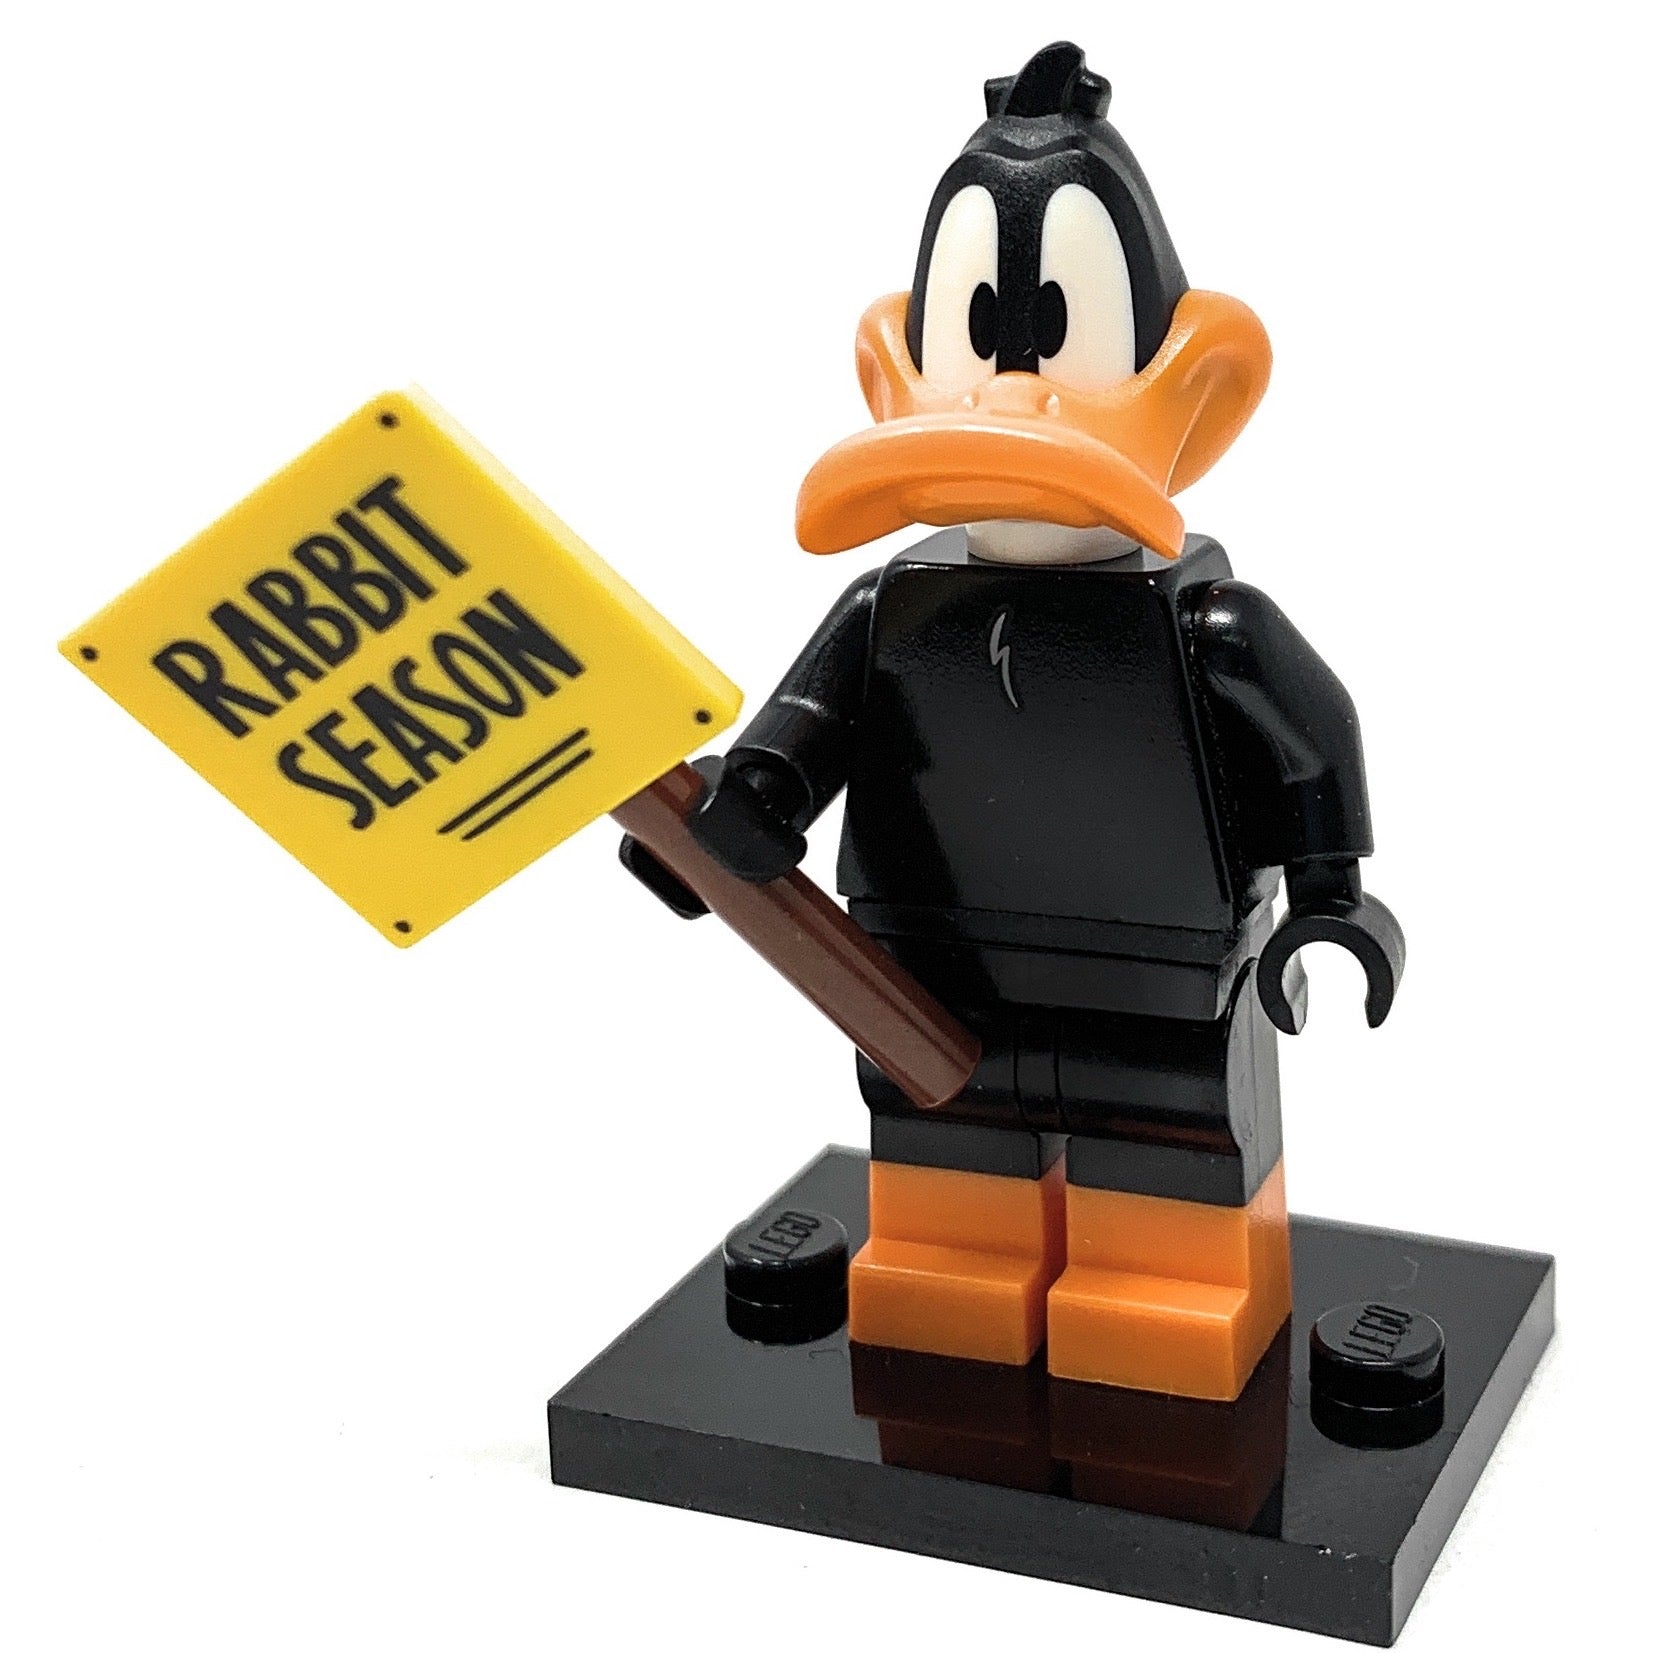 Daffy Duck - LEGO Looney Tunes Collectible Minifigure (Series 1) (2021)